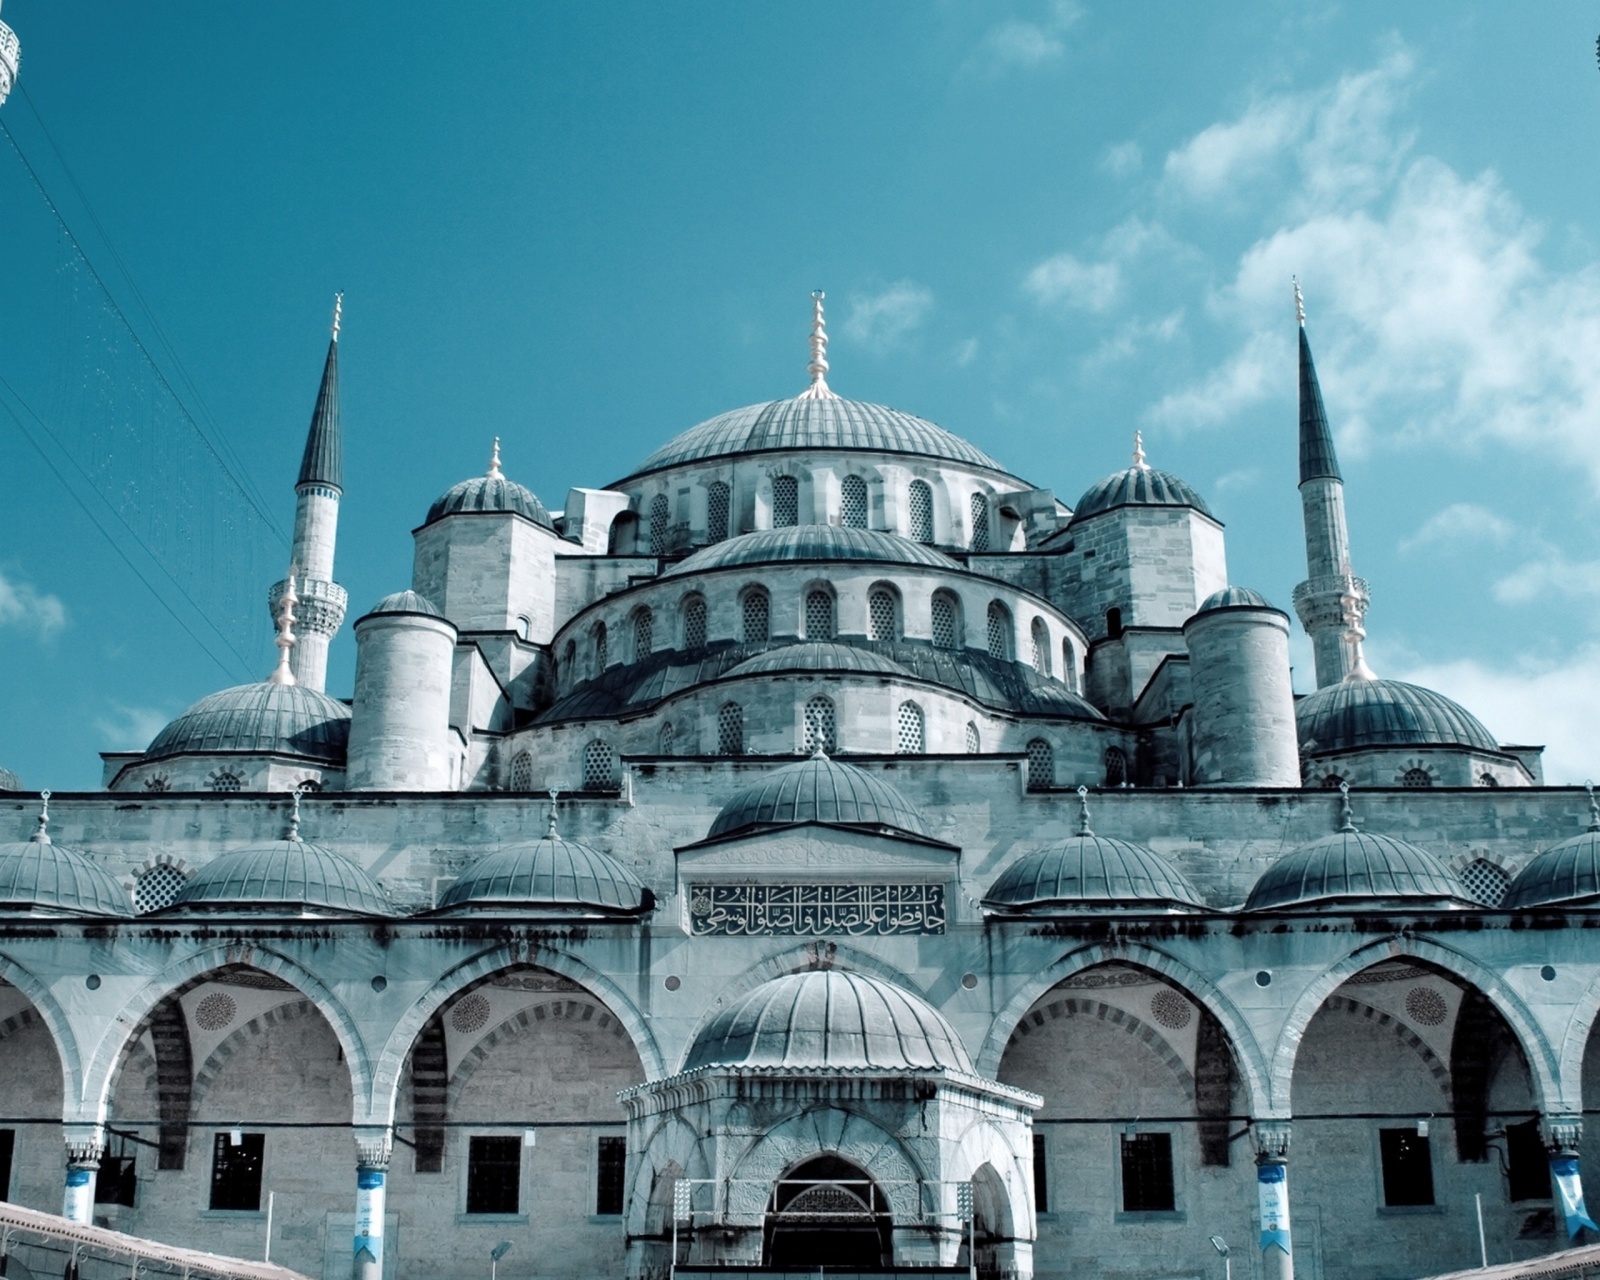 Sultan Ahmed Mosque in Istanbul screenshot #1 1600x1280